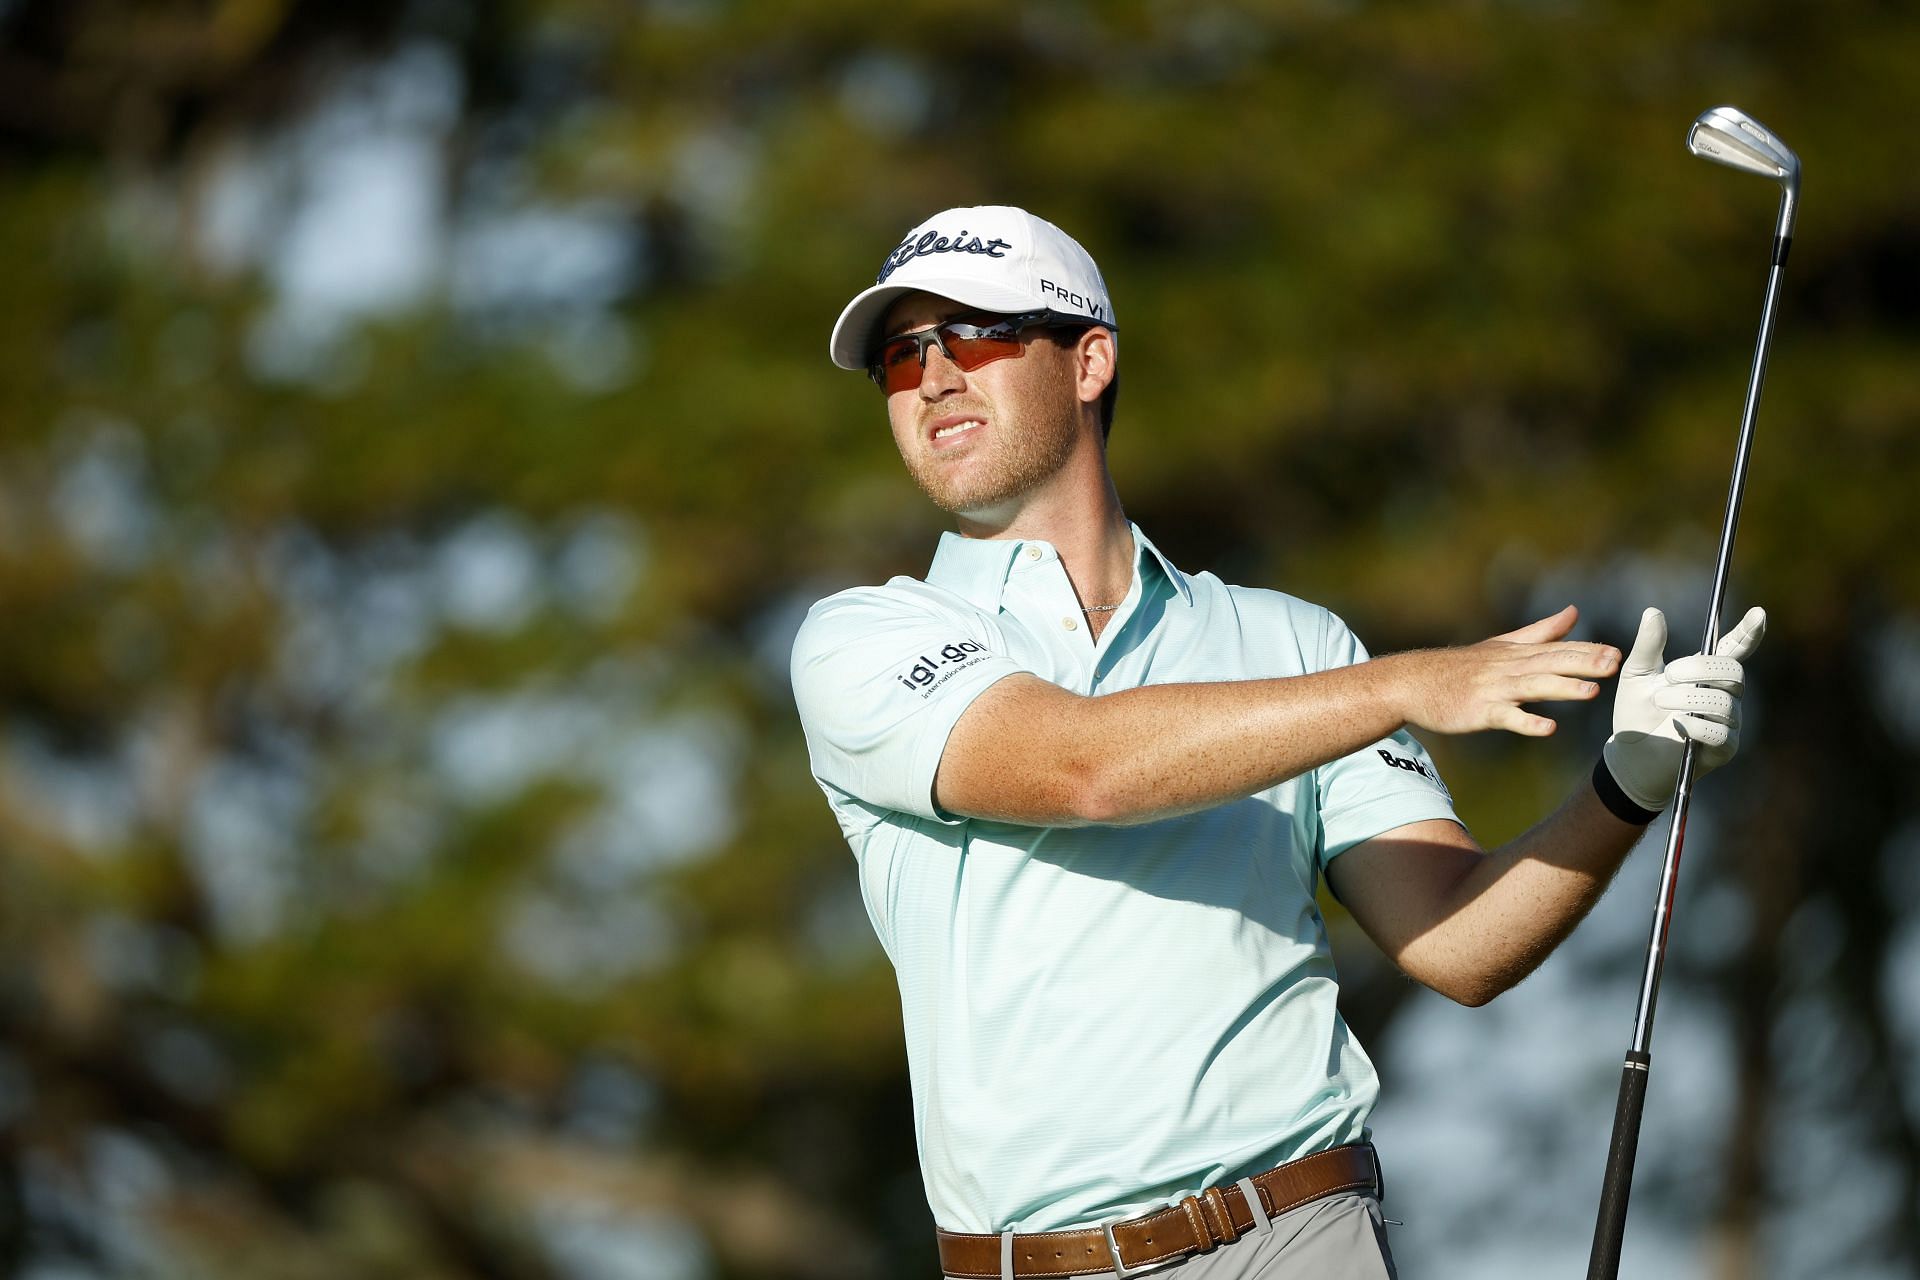 Sony Open in Hawaii - Round One (Photo by Cliff Hawkins/Getty Images)